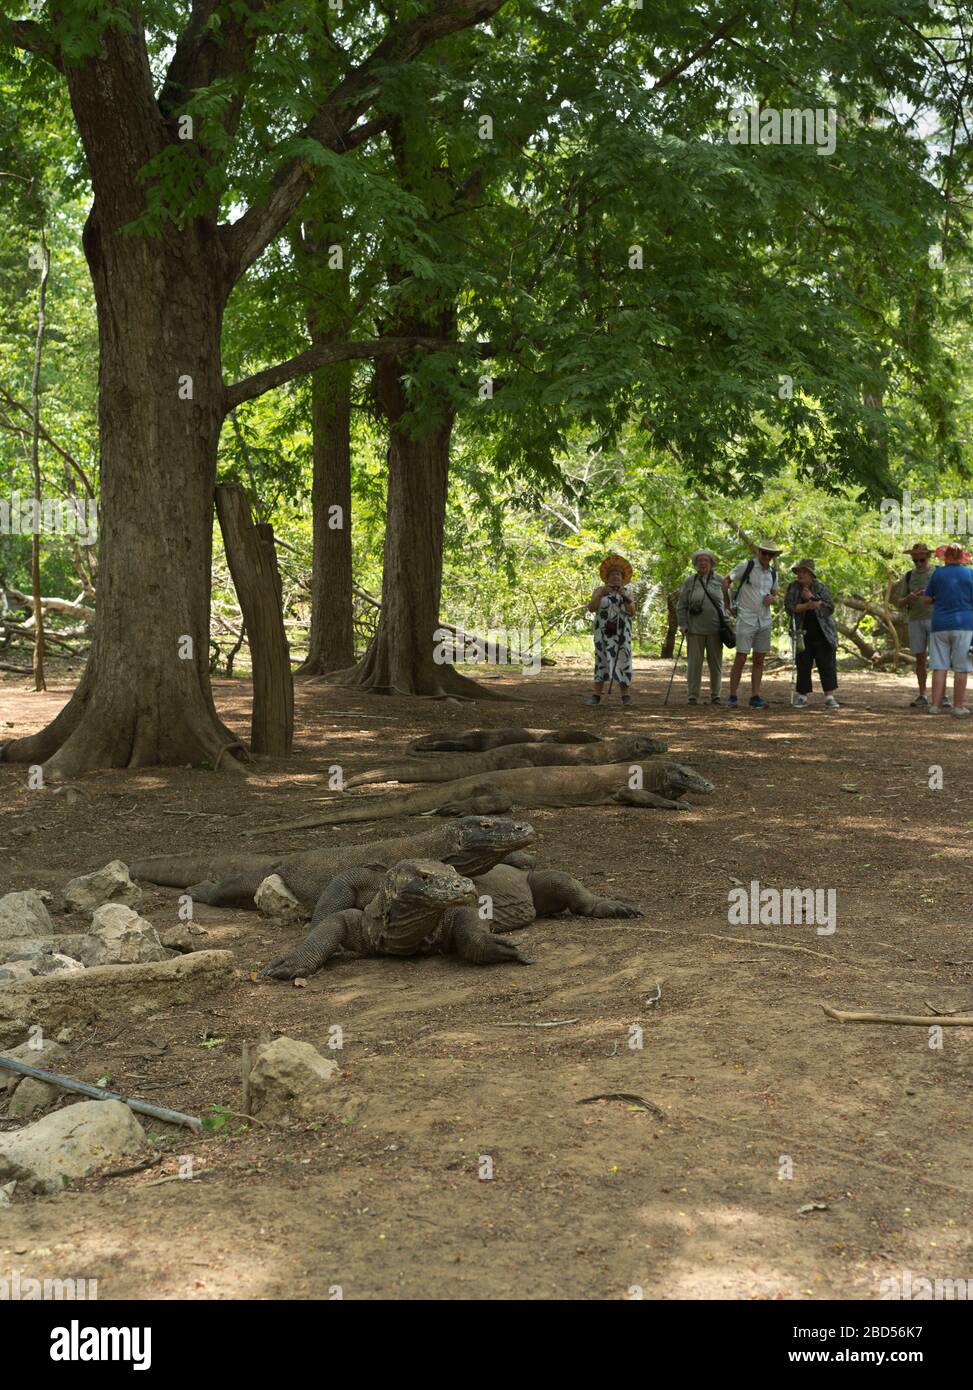 dh Tamarind Forest KOMODO ISLAND INDONESIA Tourist Group of tourists viewing Komodo dragons at watering hole dragon national park Stock Photo